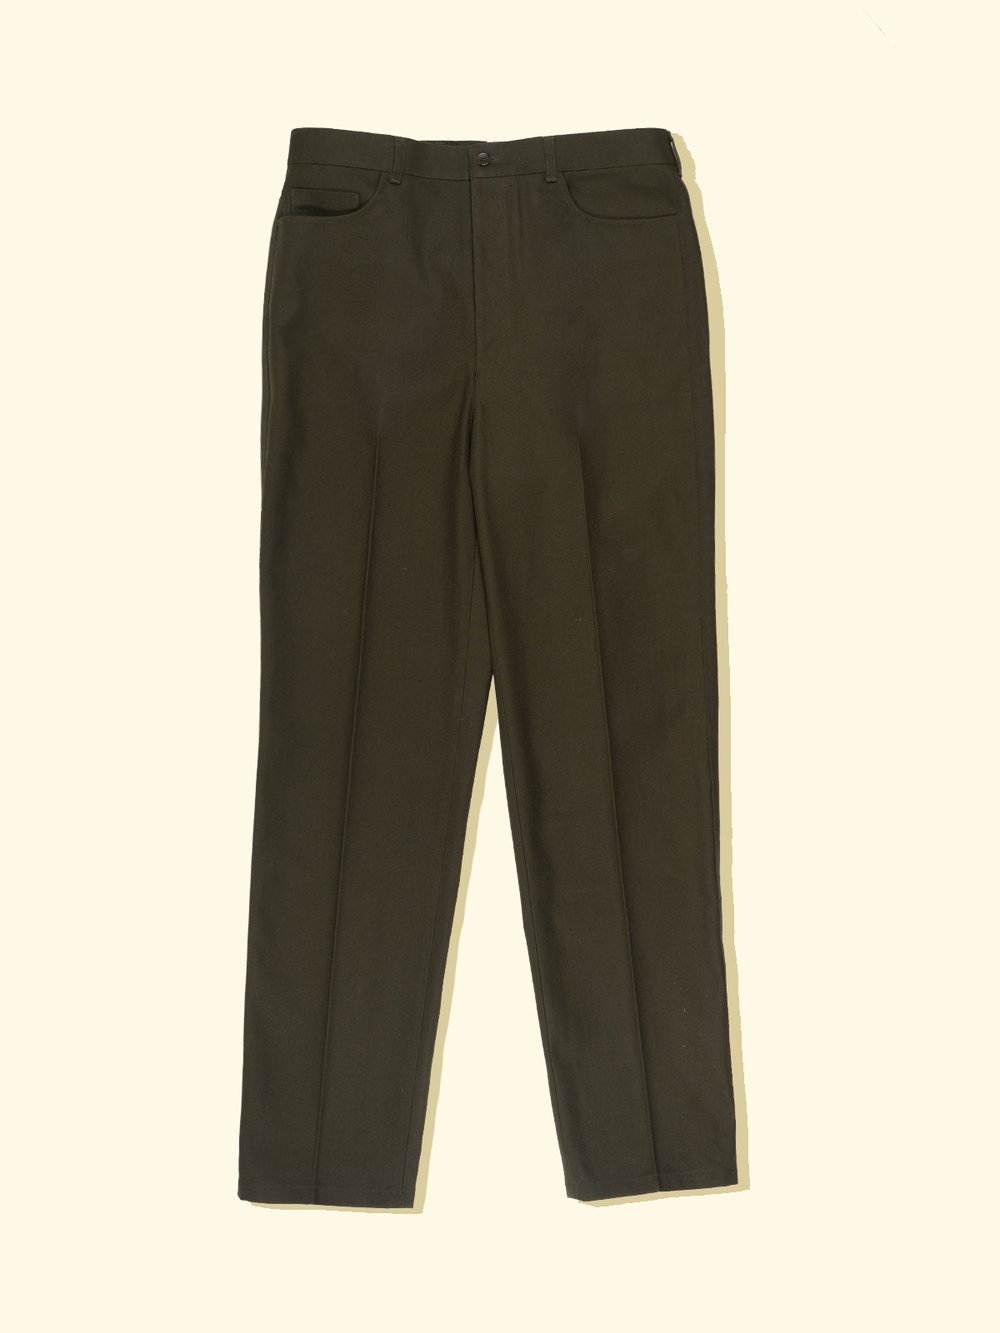 Civilman Trousers - Deep Olive Cotton Drill